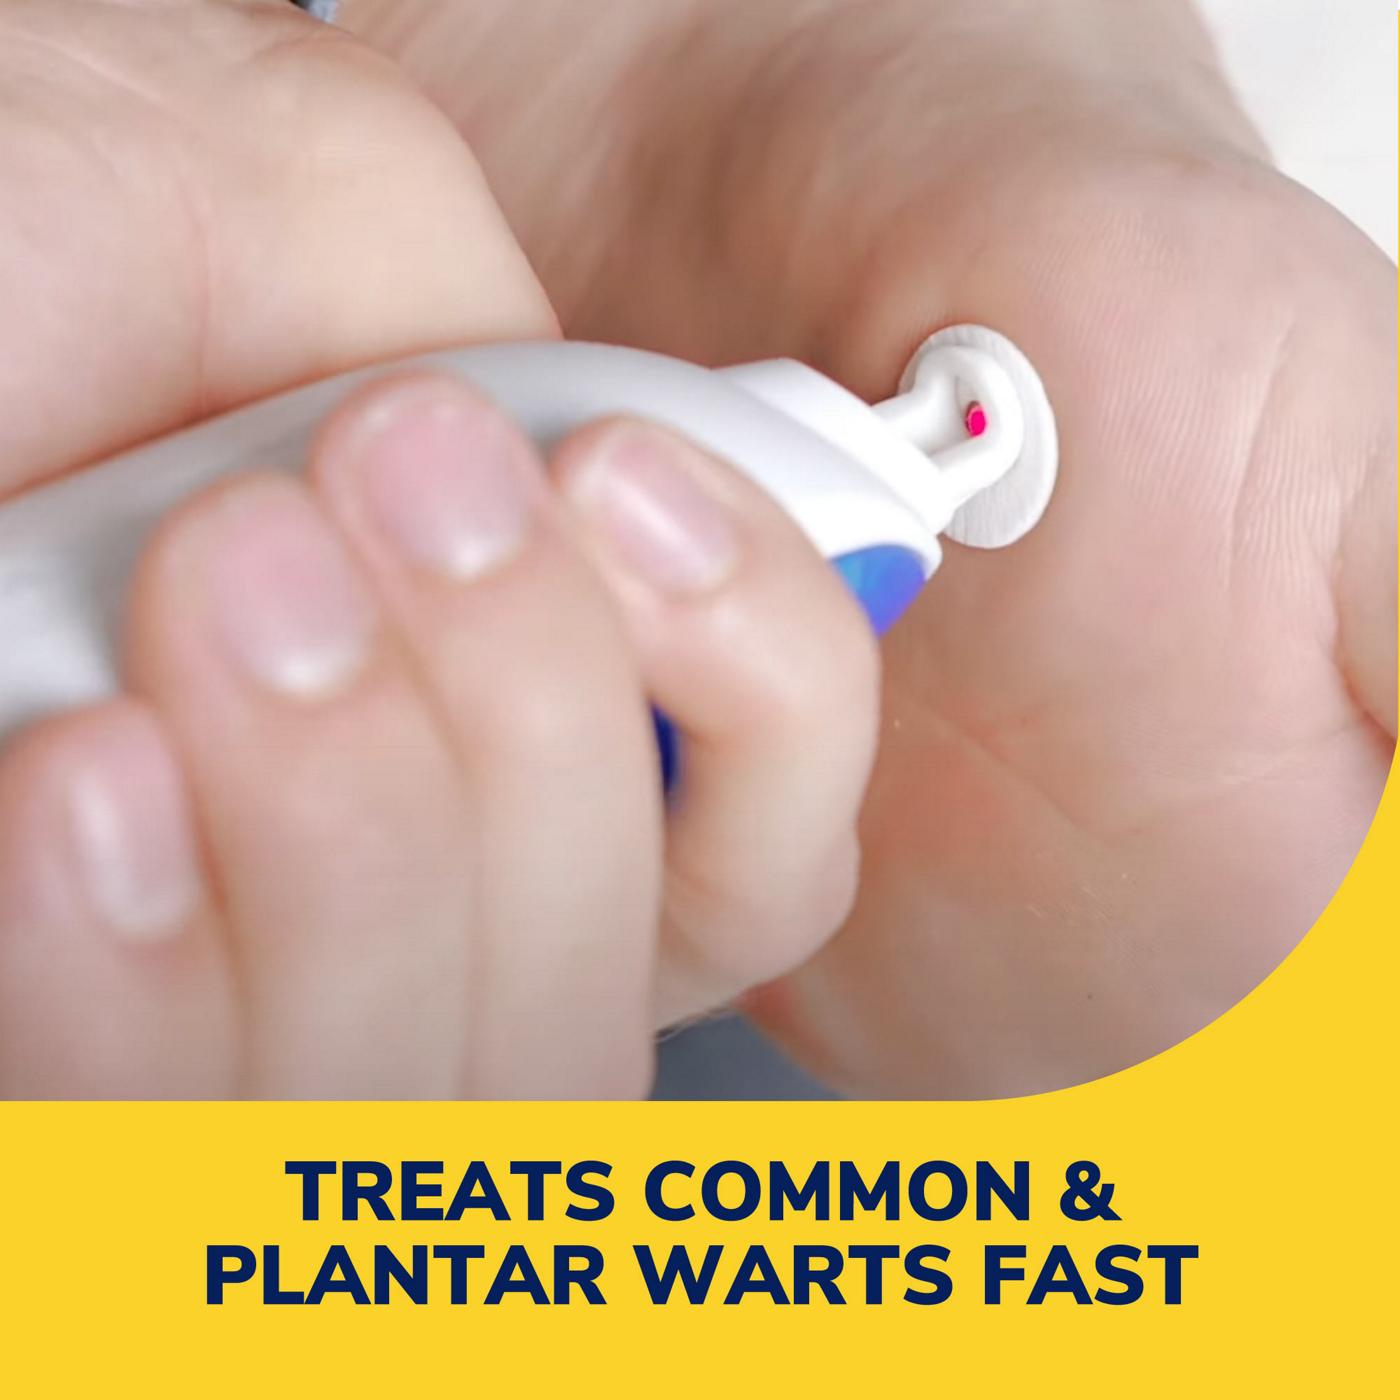 Dr. Scholl's Freese Away Max Wart Remover; image 4 of 9